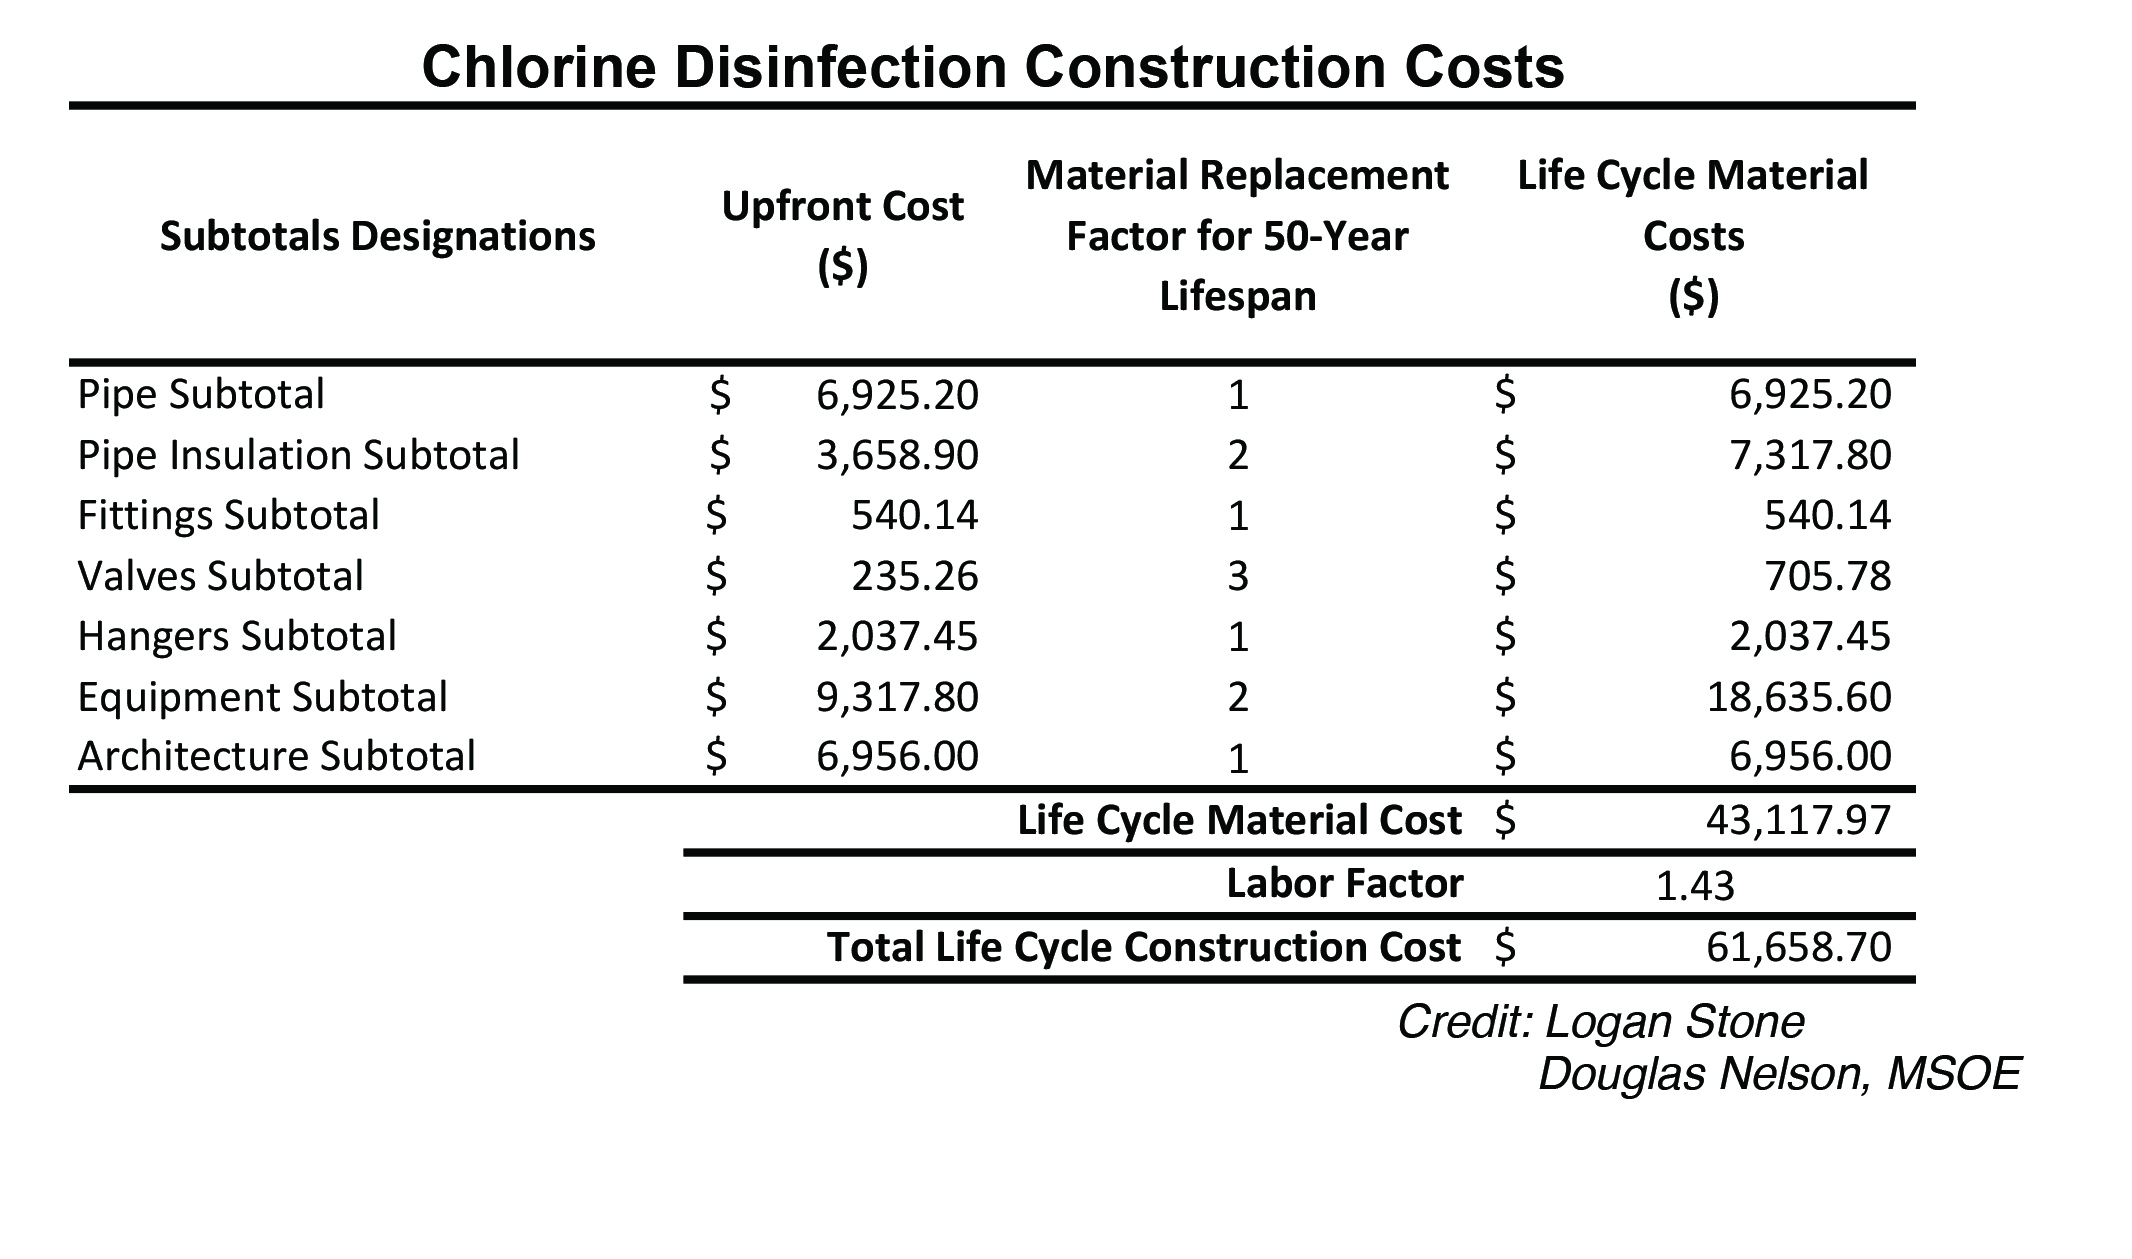 PE0322_Fig4-Chlorine Disinfection Construction Costs copy.jpg